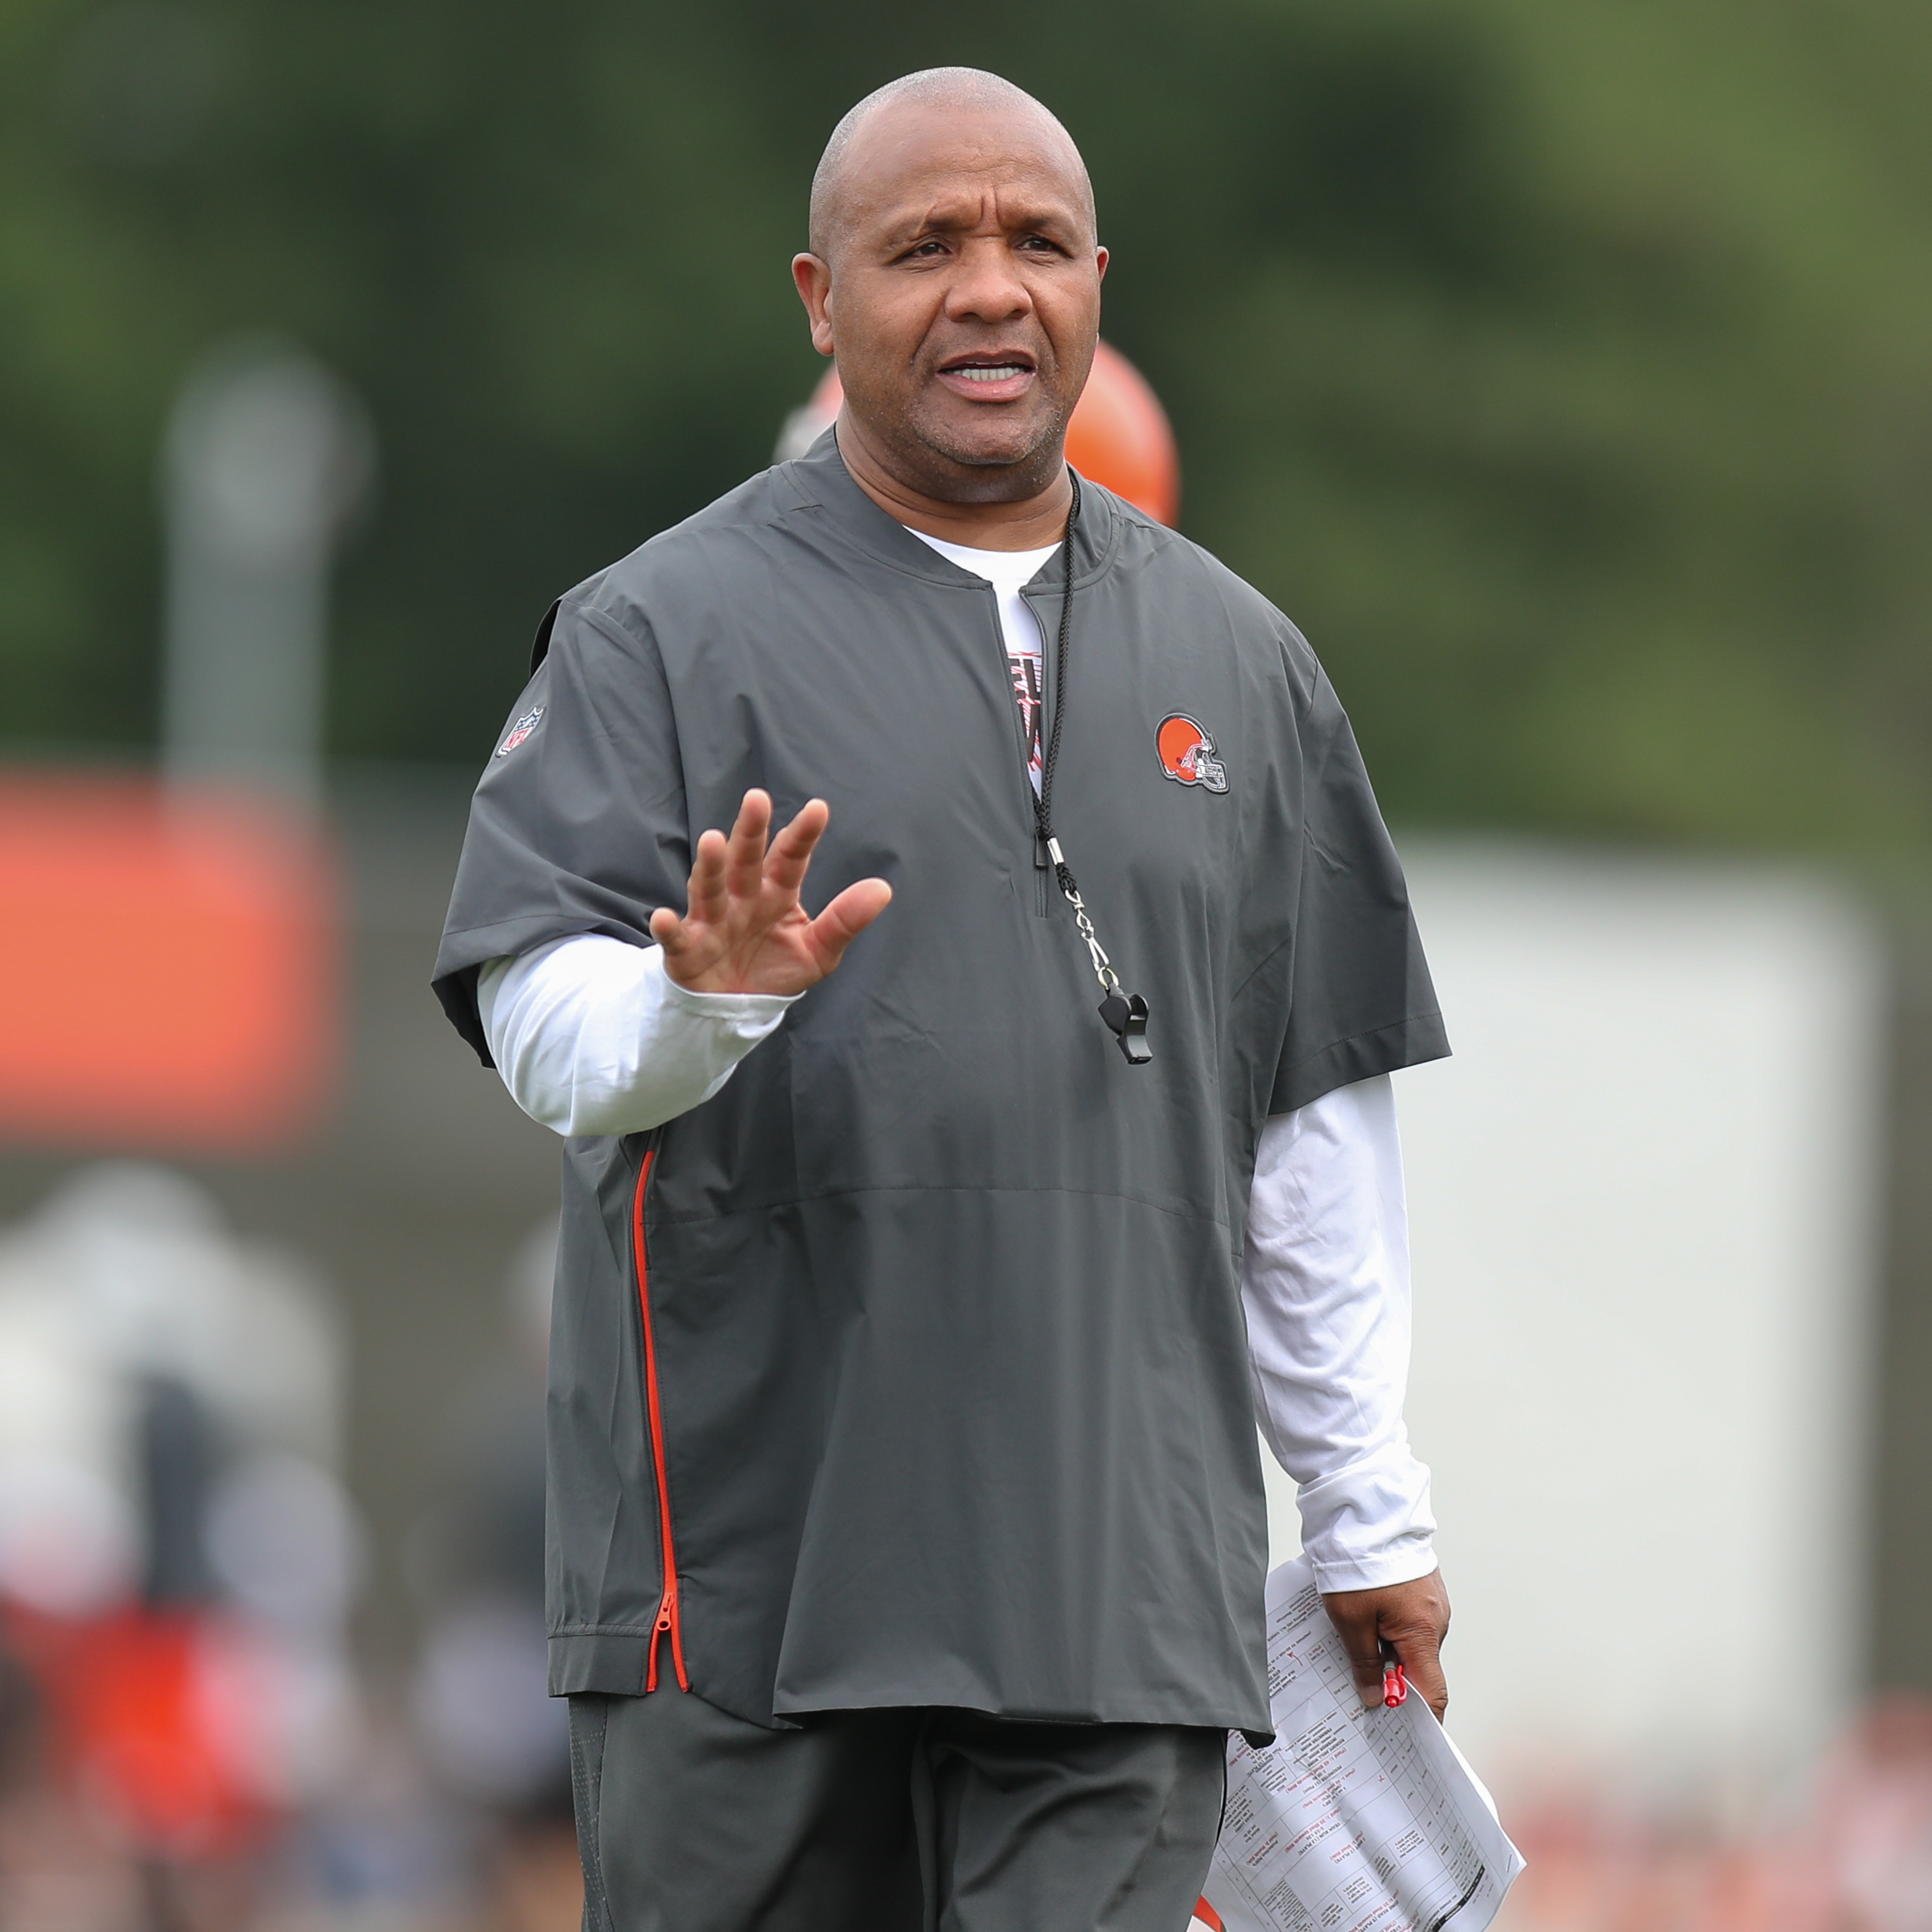 Report: Hue Jackson’s Browns Contract Included ‘4-Year-Plan’ Bonuses Up to $750K